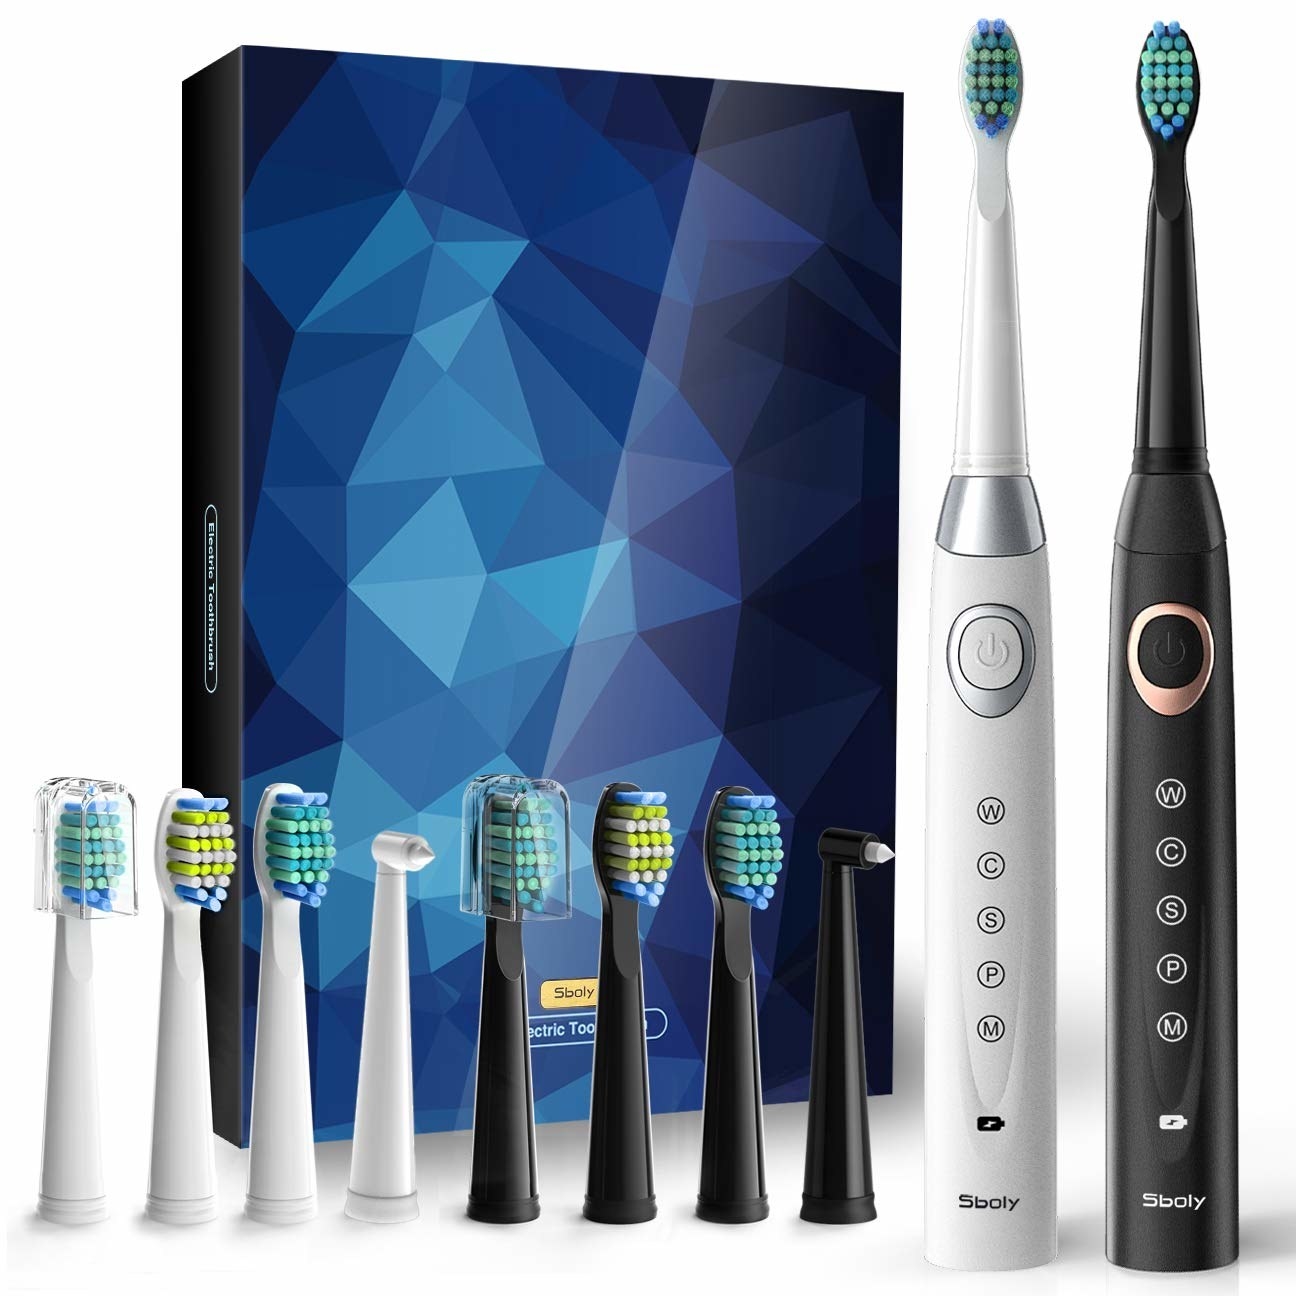 Set of two electric toothbrushes, one black, one white, with four different colored brush heads for each handle